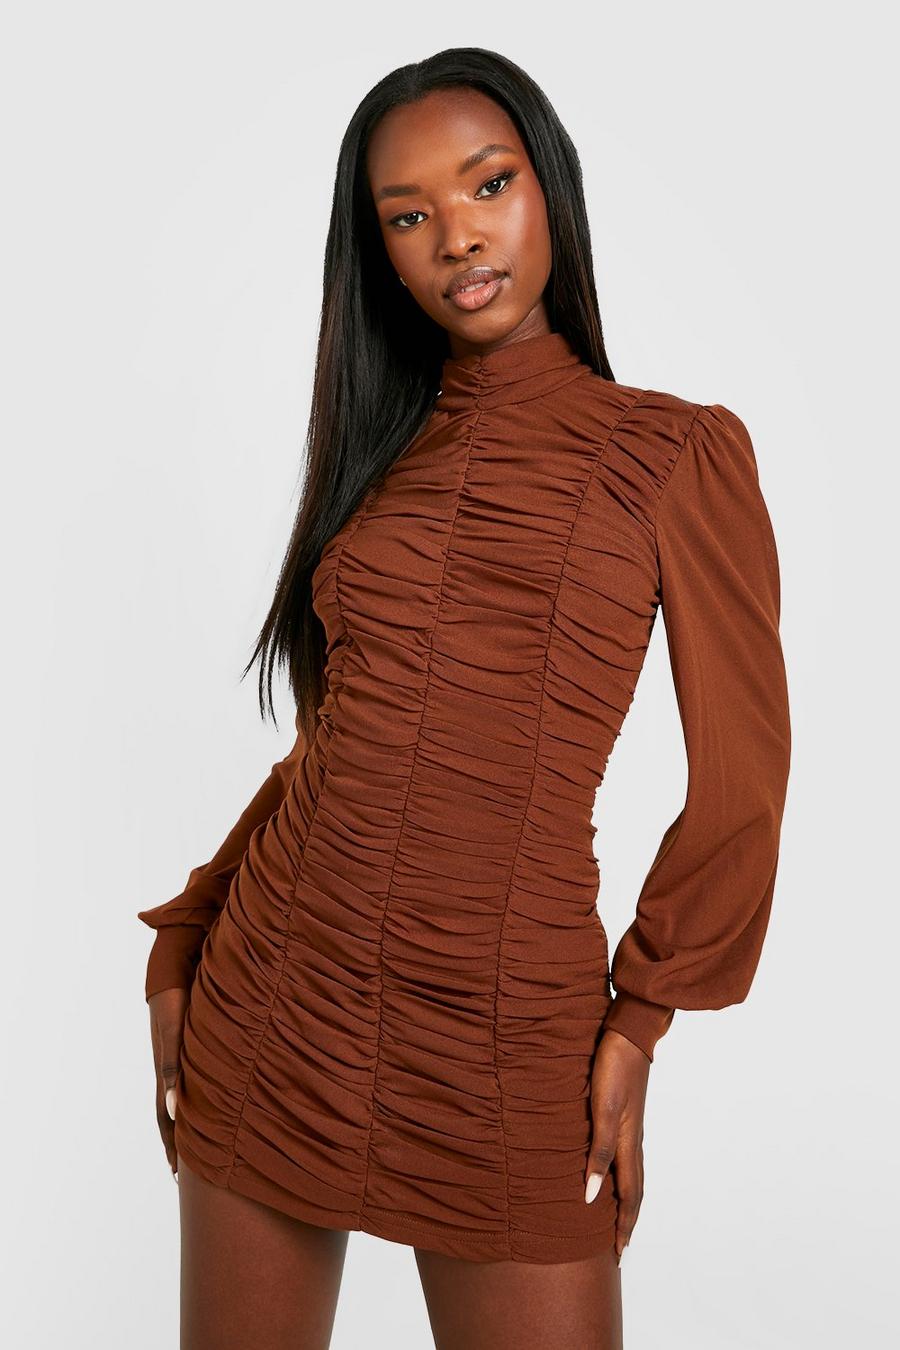 Chocolate Petite Mesh Ruched High Neck Bodycon Dress